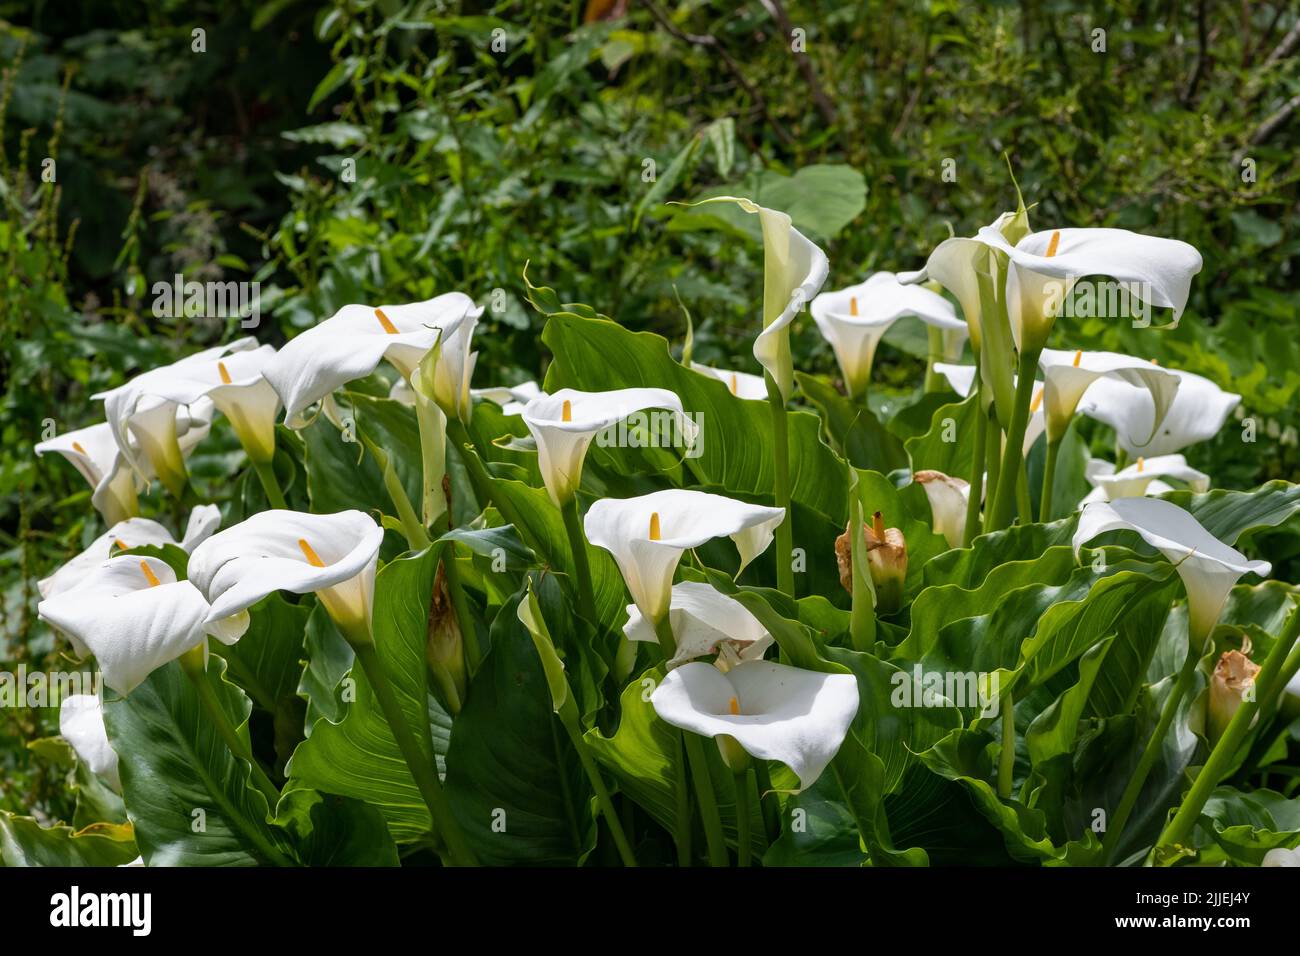 Close up of calla lily (zantedeschia aethiopica) flowers in bloom Stock Photo